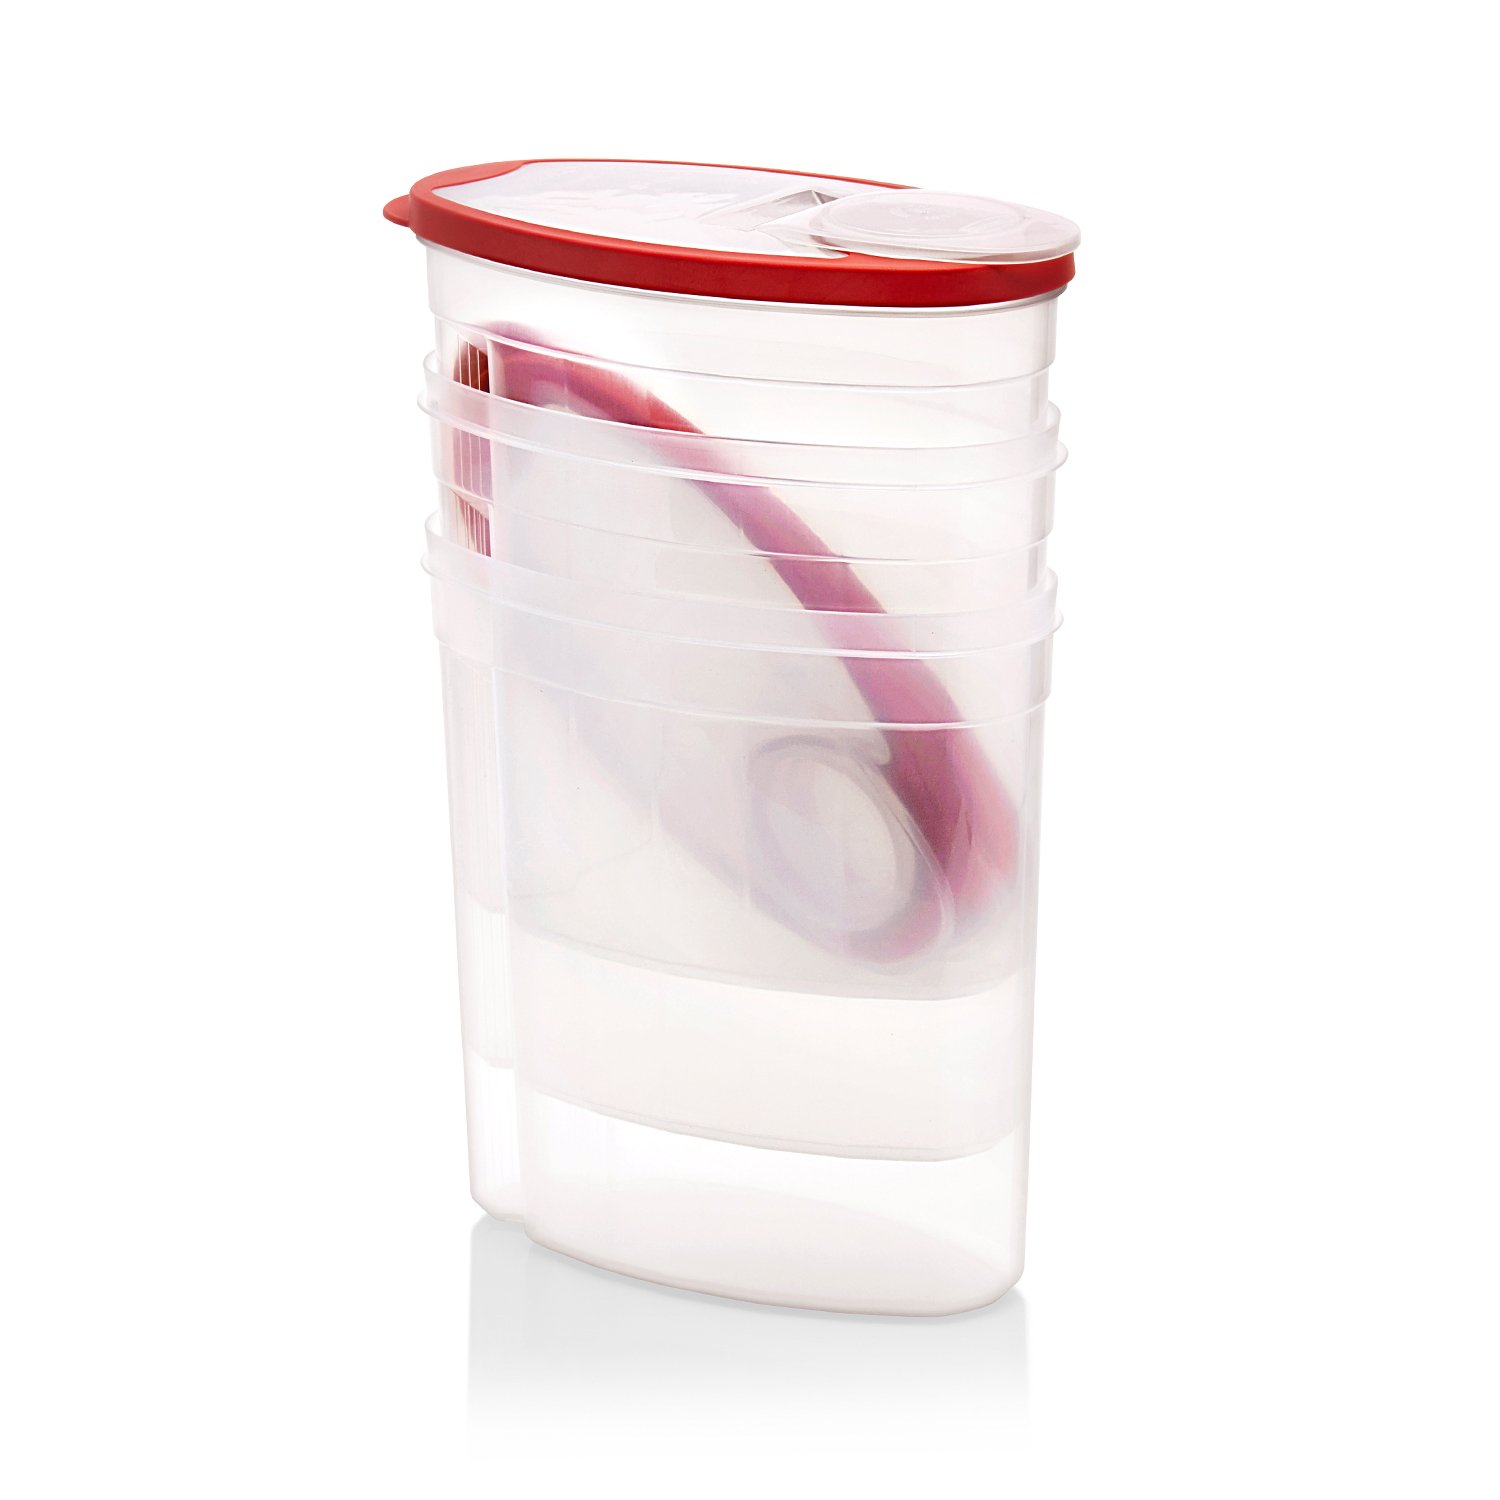 Tupperware Cereal Keepers Containers Flip-top Lids 469 1588 